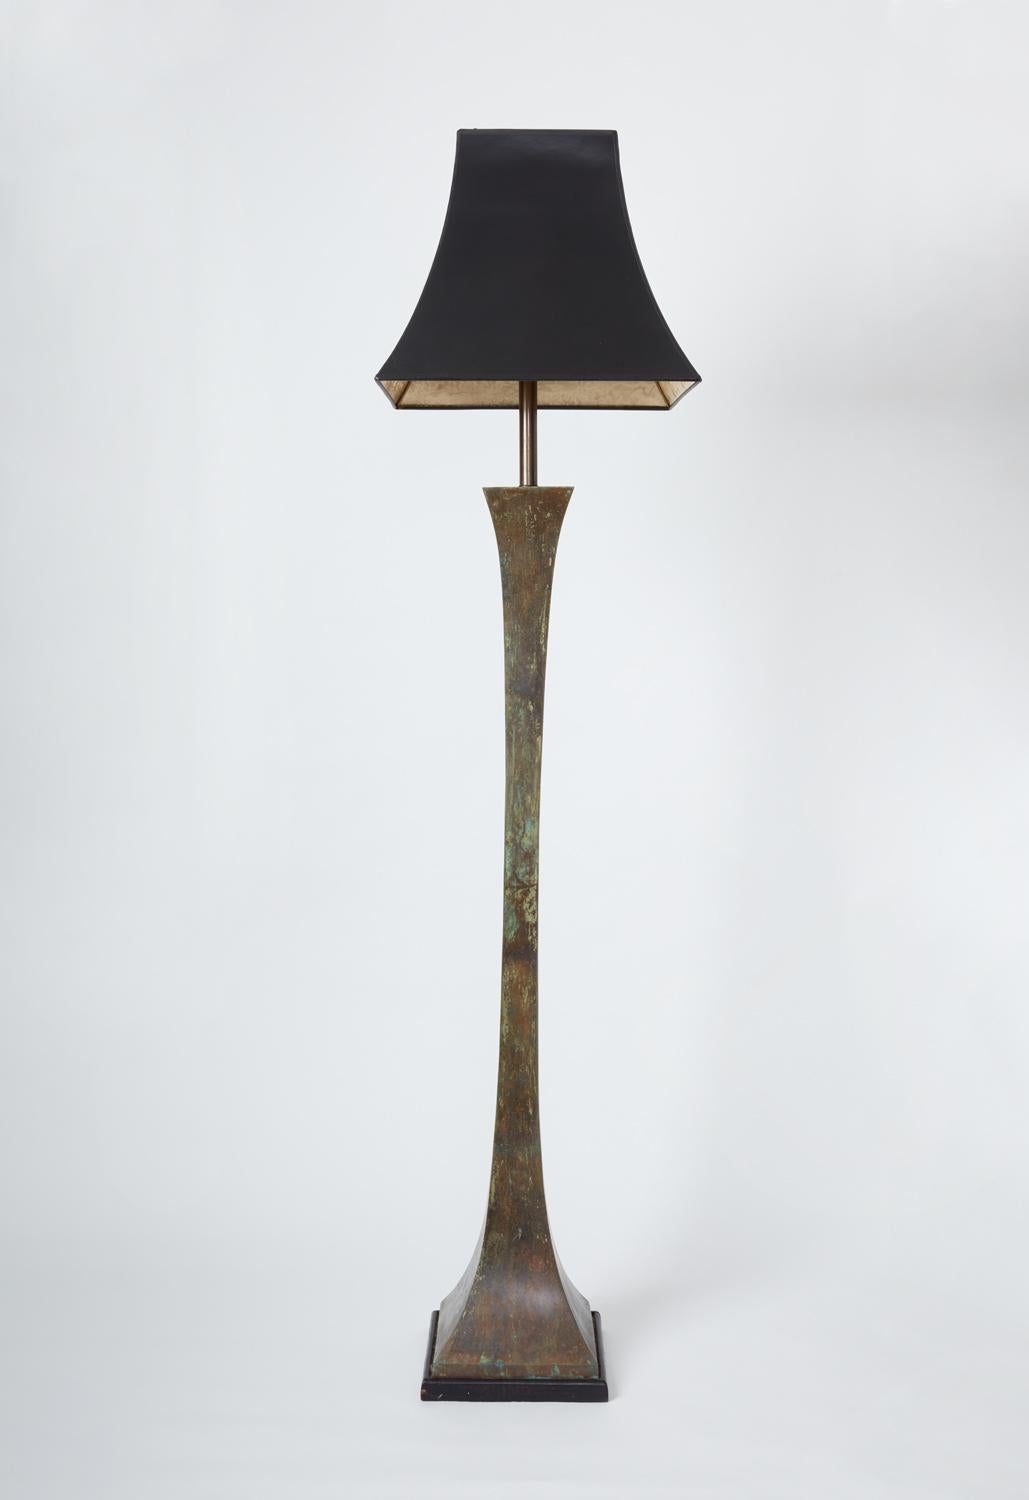 A pair of standing lamps by Stewart Ross James for Hansen, featuring a verdigris patina on heavy bronze. Solid wood base.

Can be purchased individually.